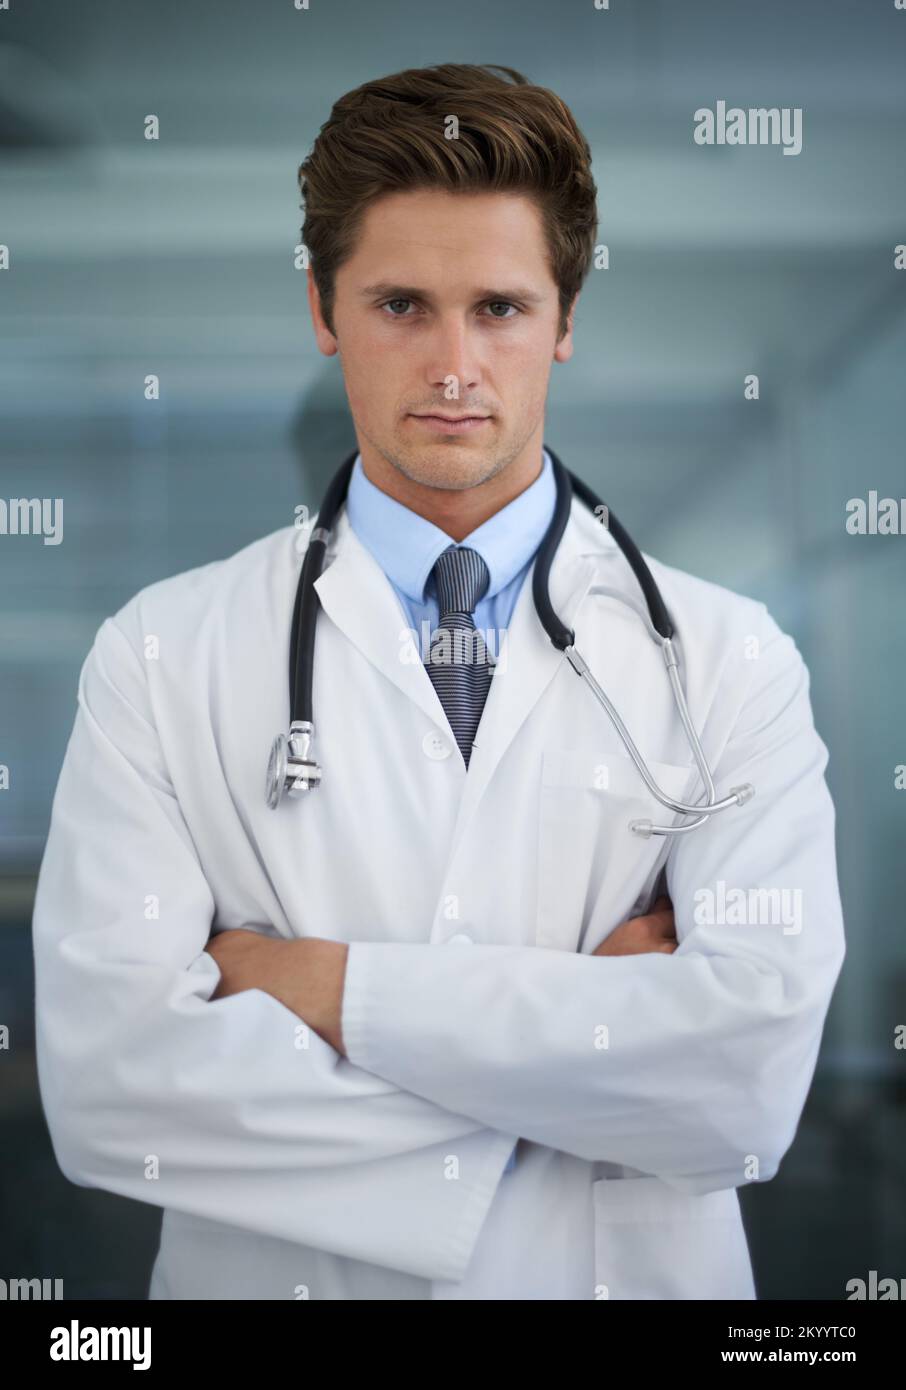 Serious about your health. Portrait of a serious-looking young doctor standing with his arms folded. Stock Photo